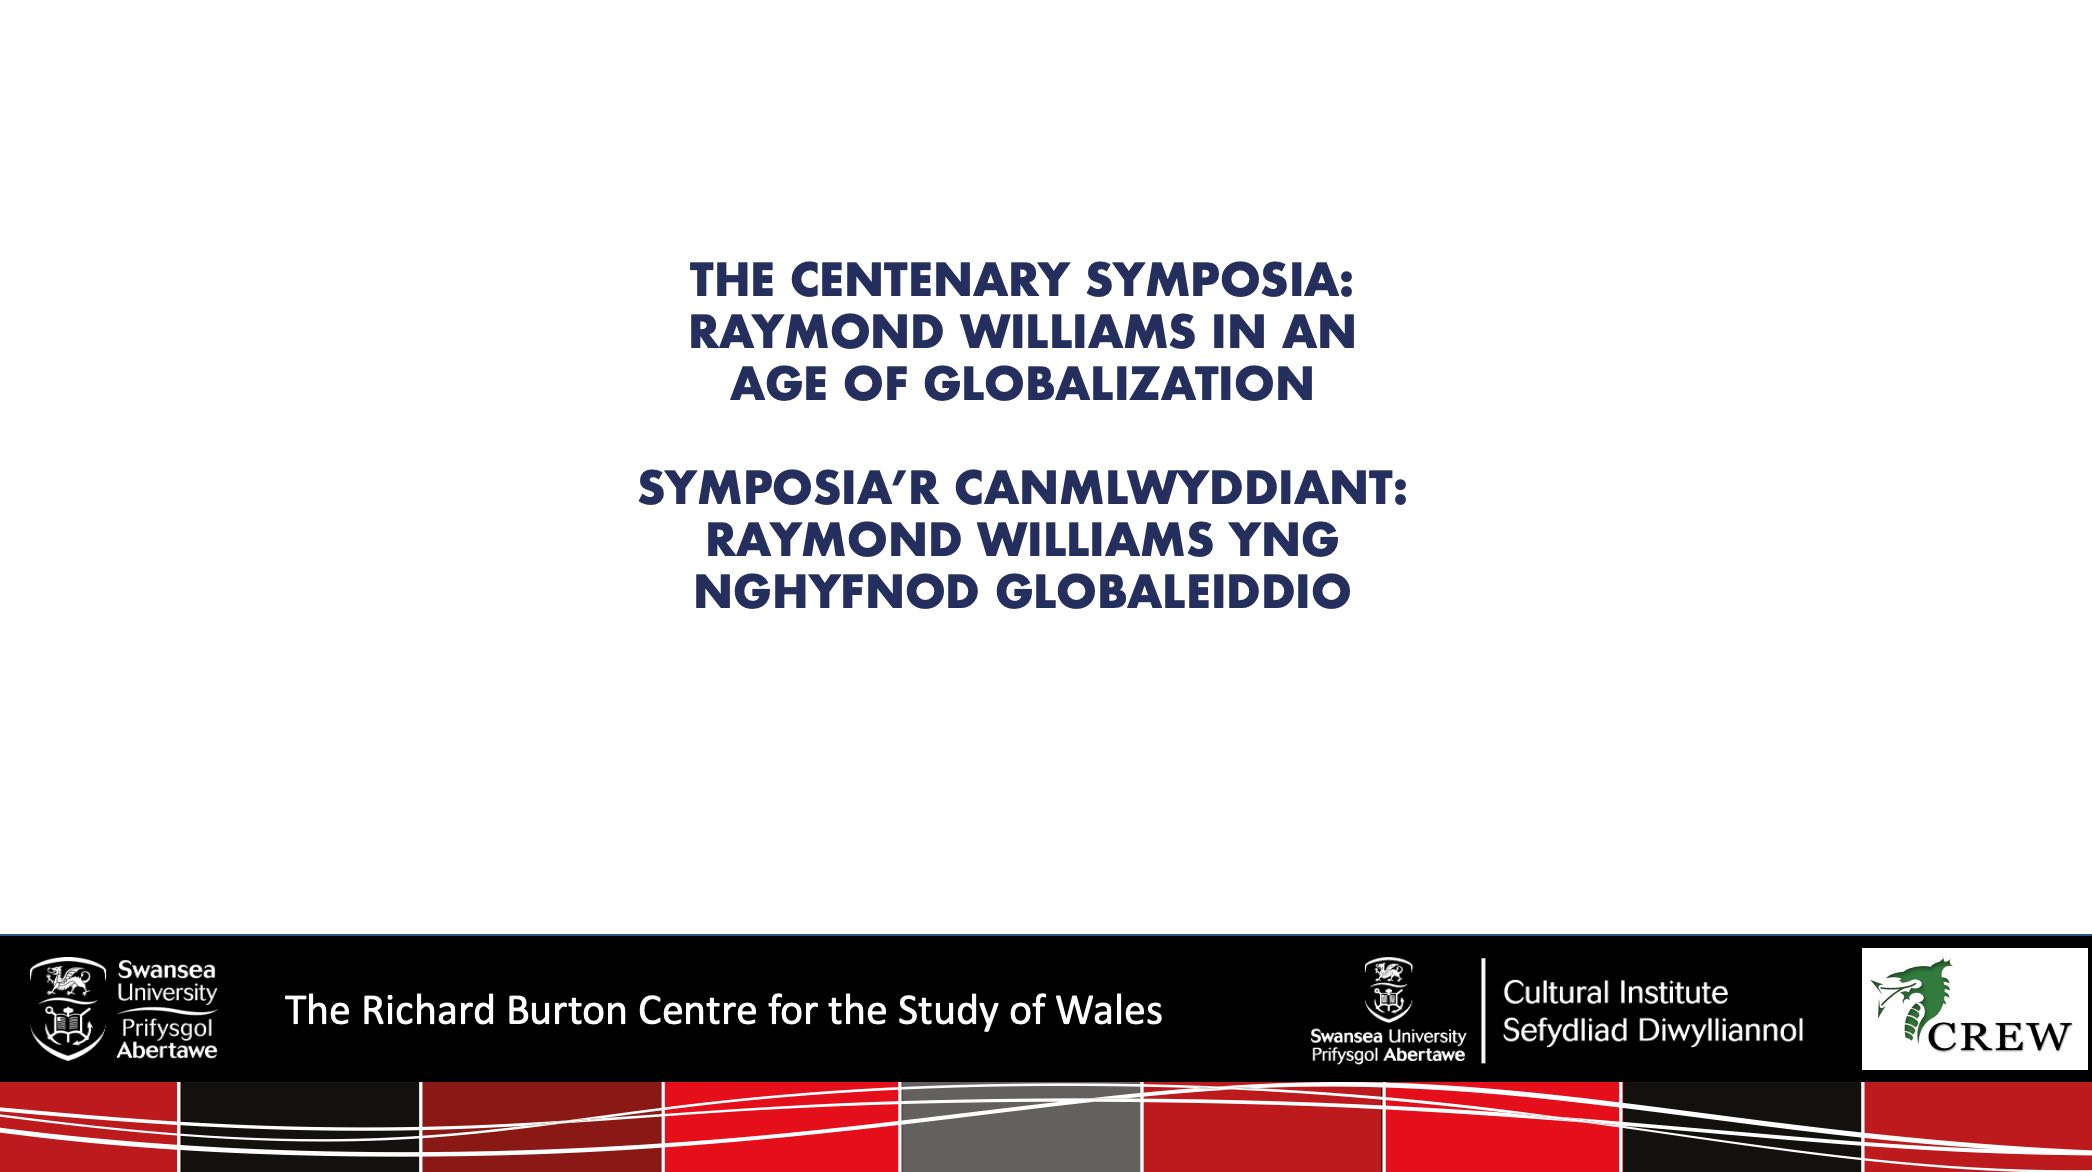 This is an image of the title page of the Raymond Williams symposia